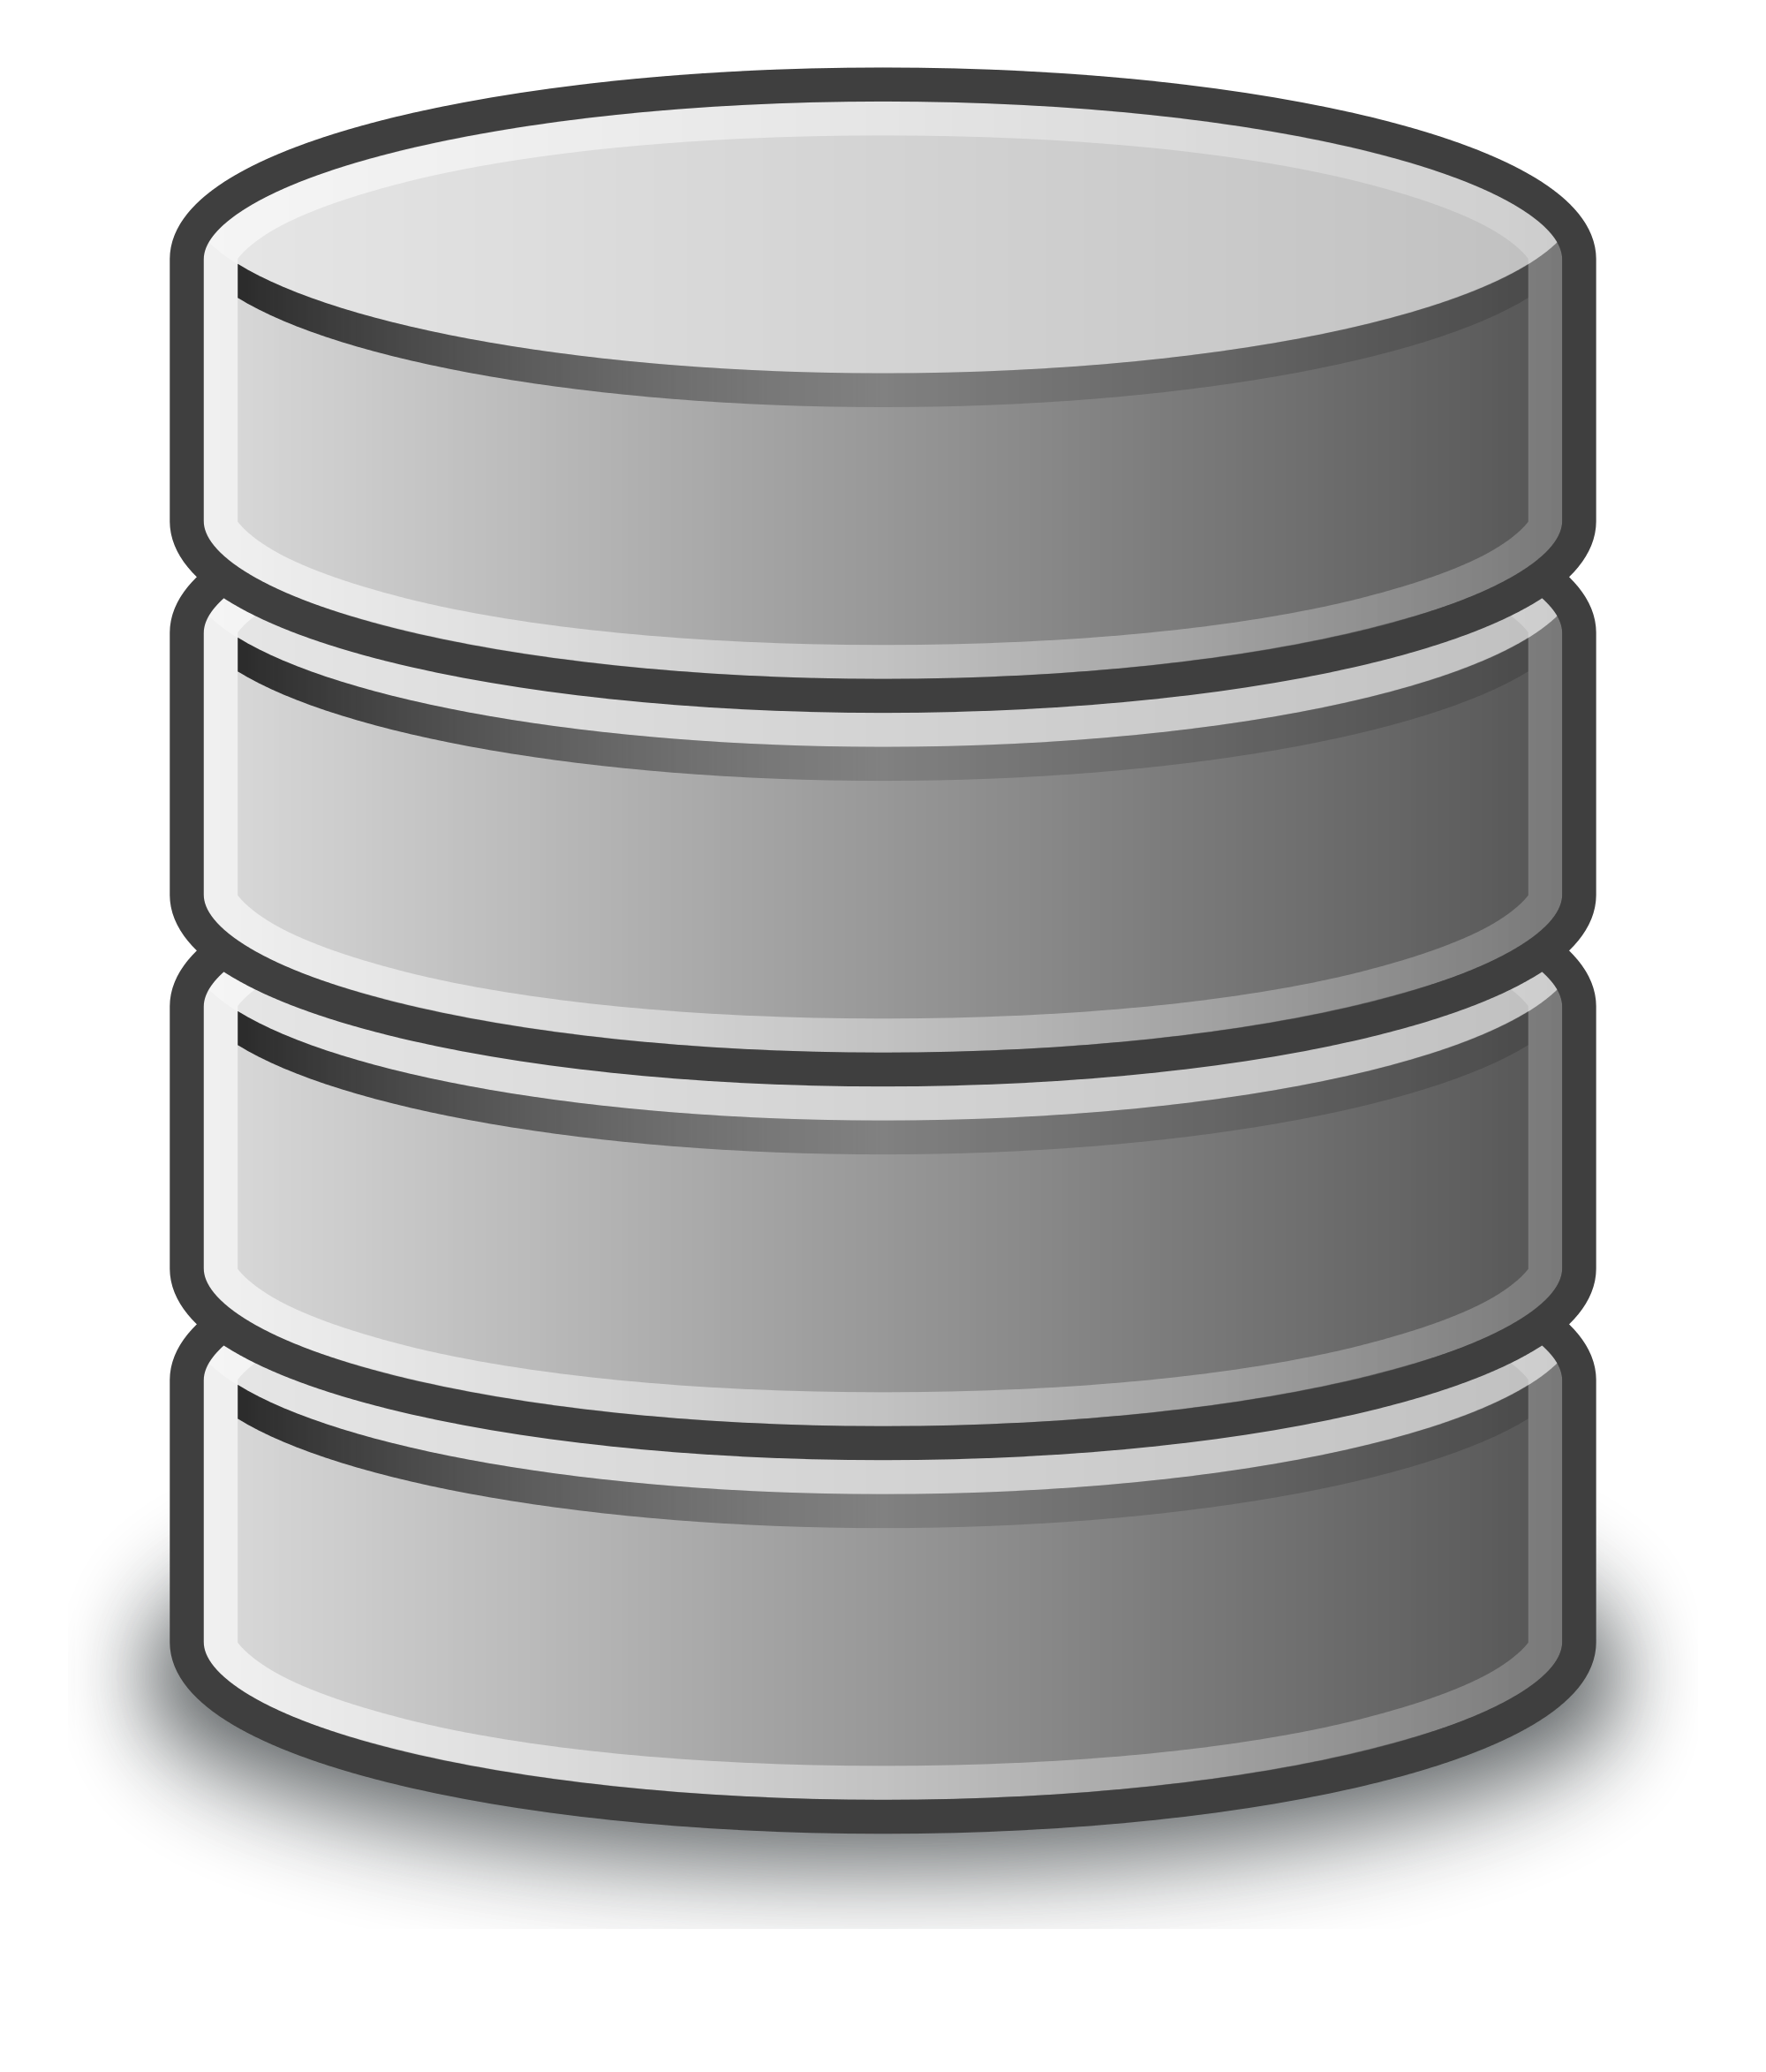 File:Scheme of four disk storage.svg - Wikimedia Commons